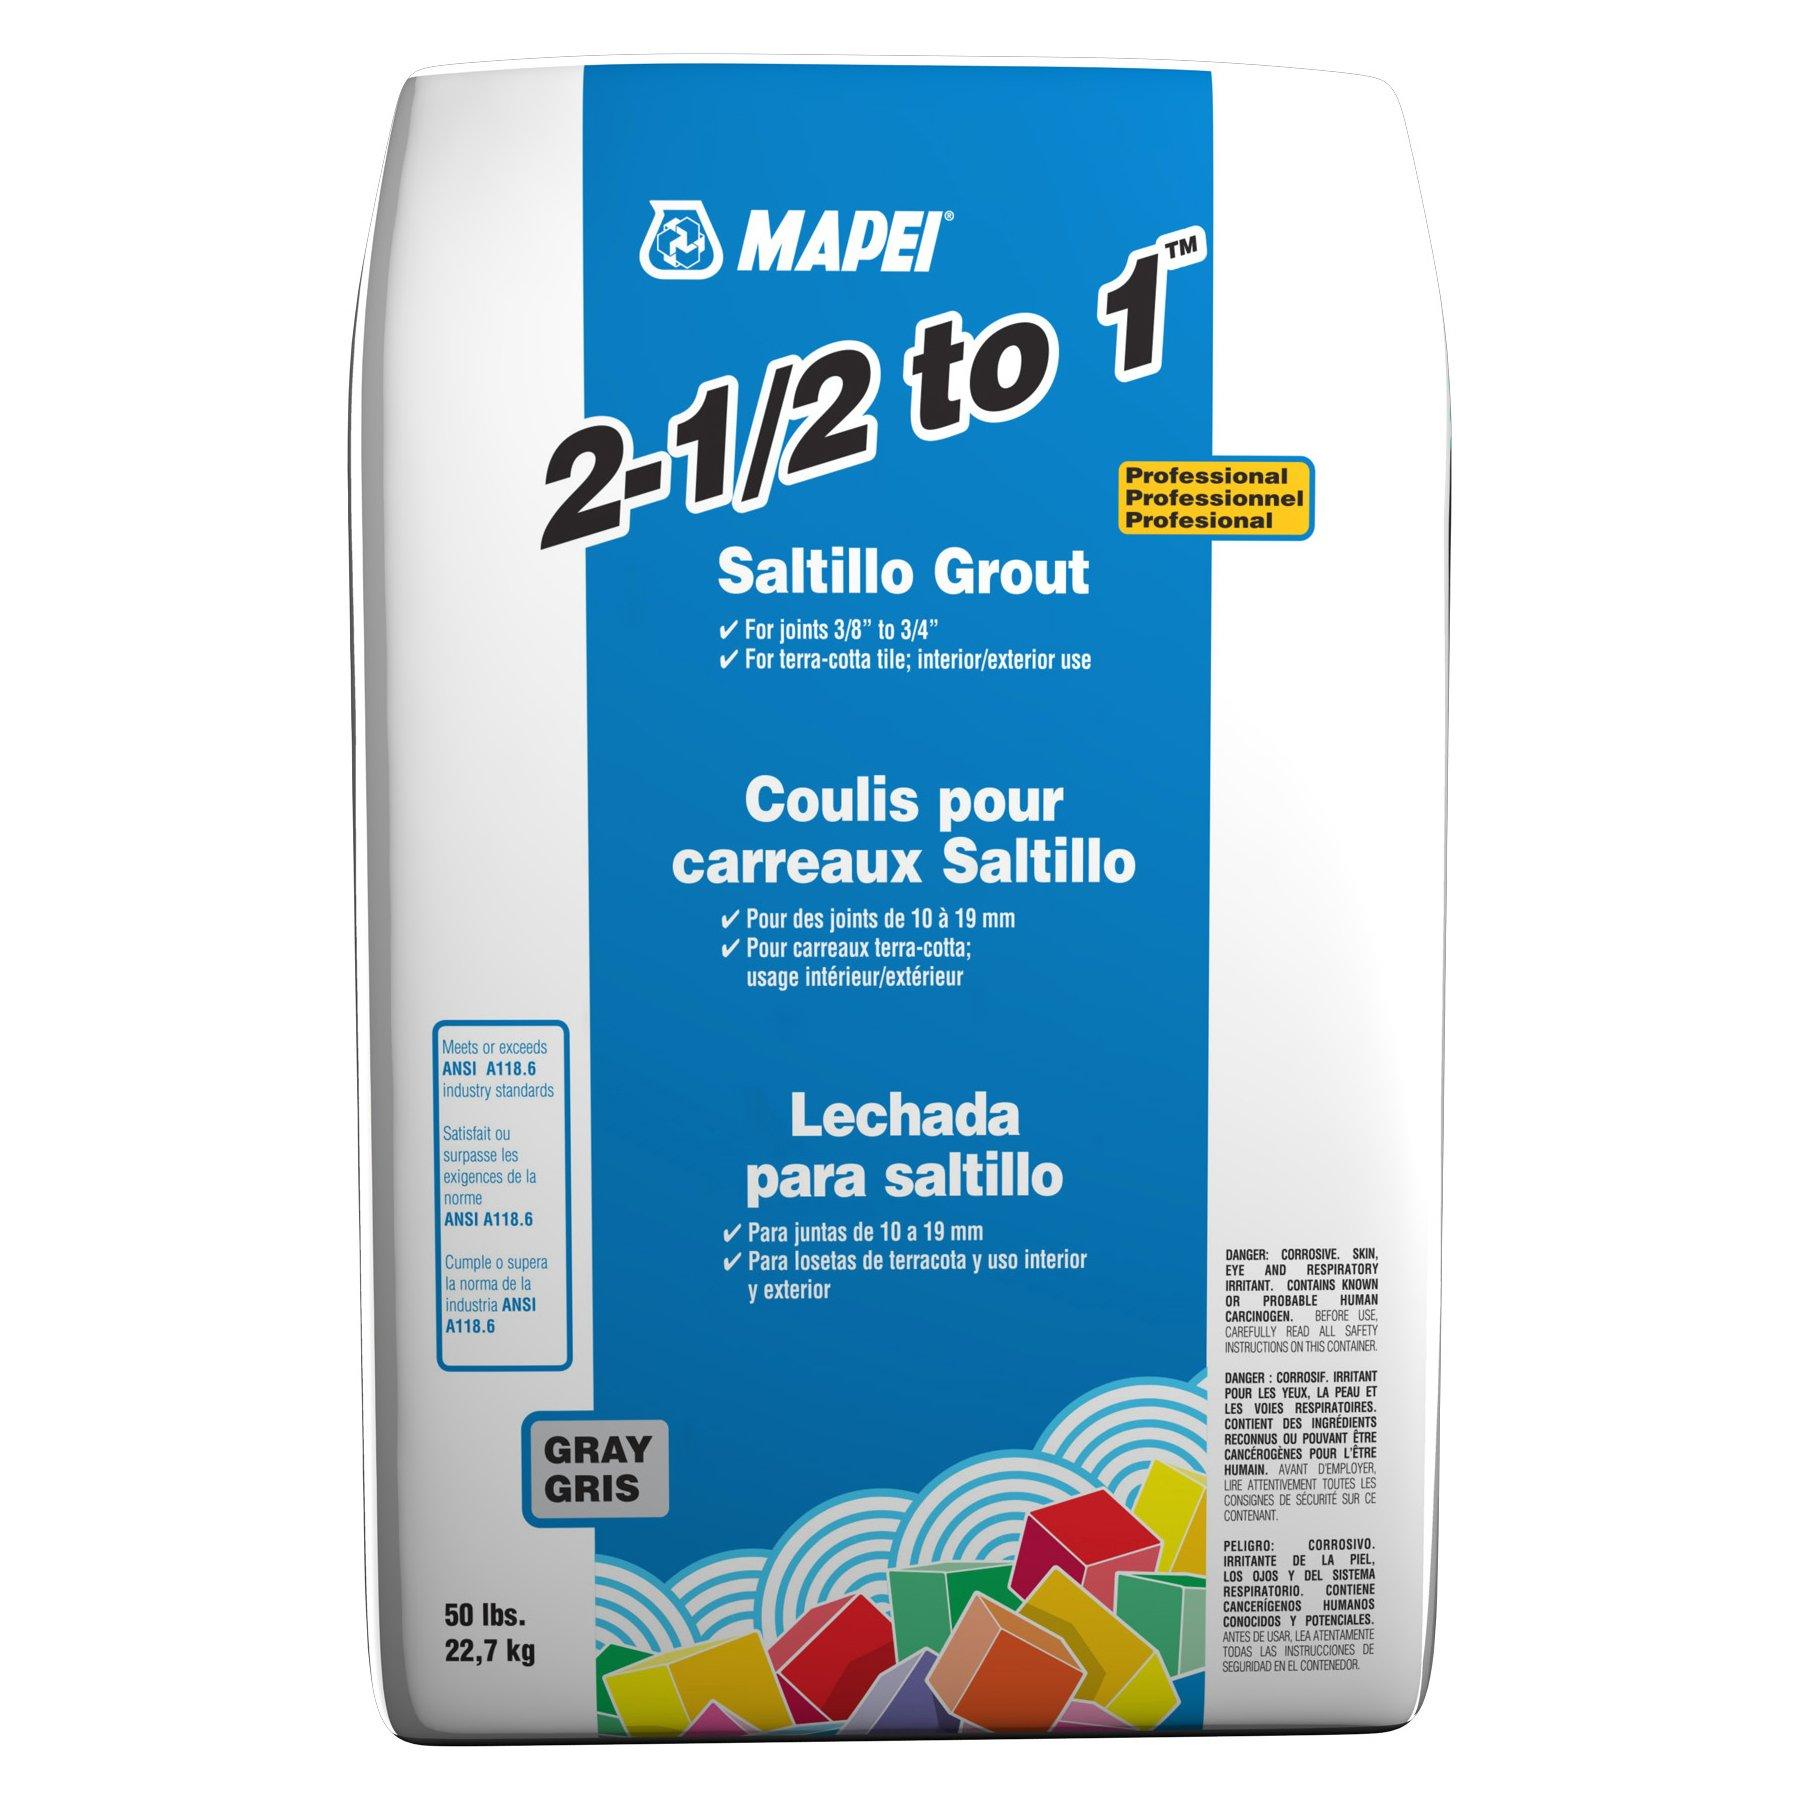 Mapei 2-1/2 to 1 Professional Saltillo Tile Grout